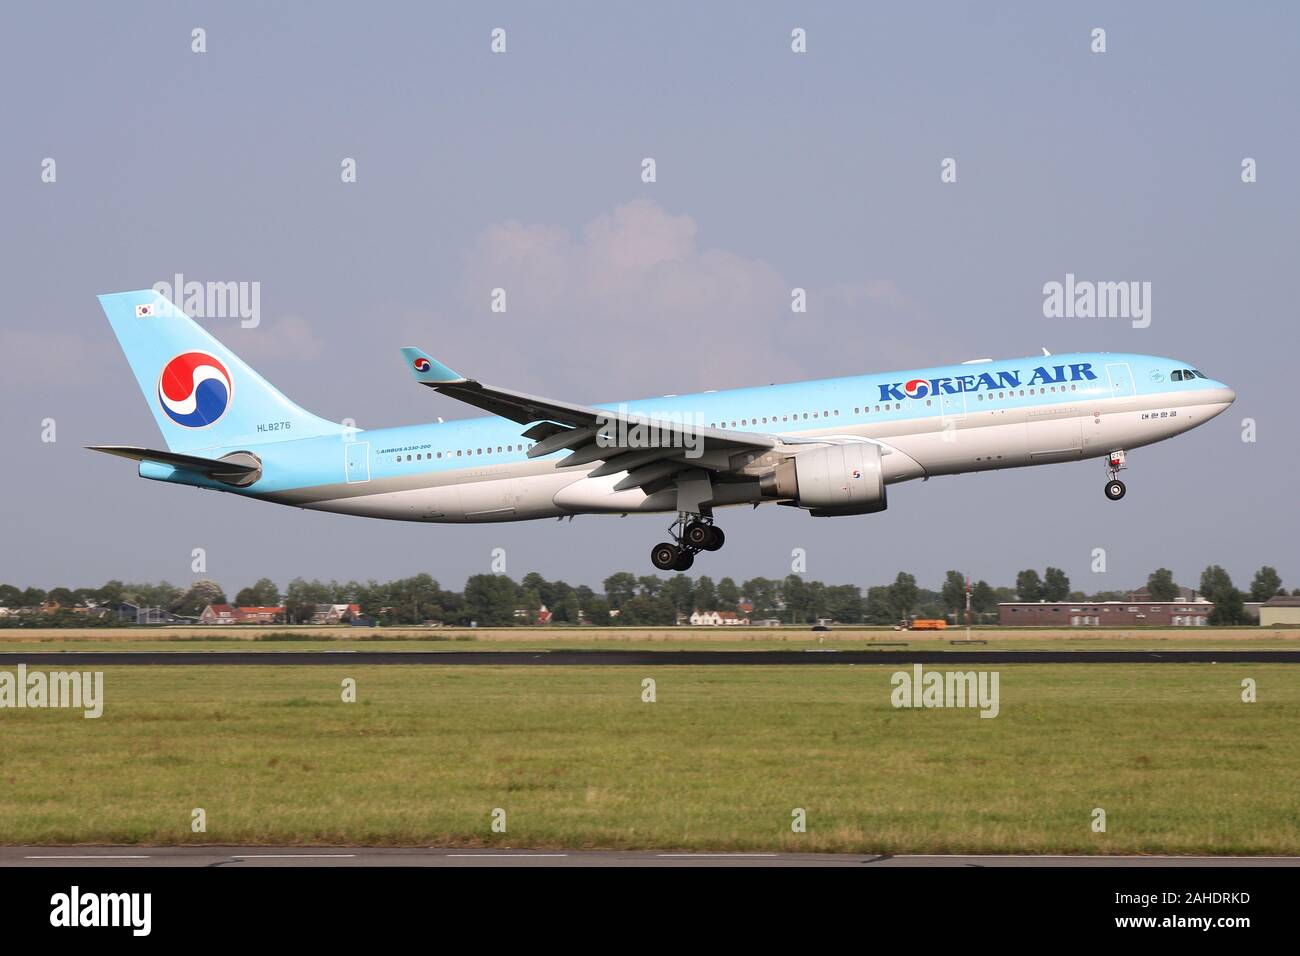 Korean Air Airbus A330-200 with registration HL8276 on short final for runway 18R (Polderbaan) of Amsterdam Airport Schiphol. Stock Photo